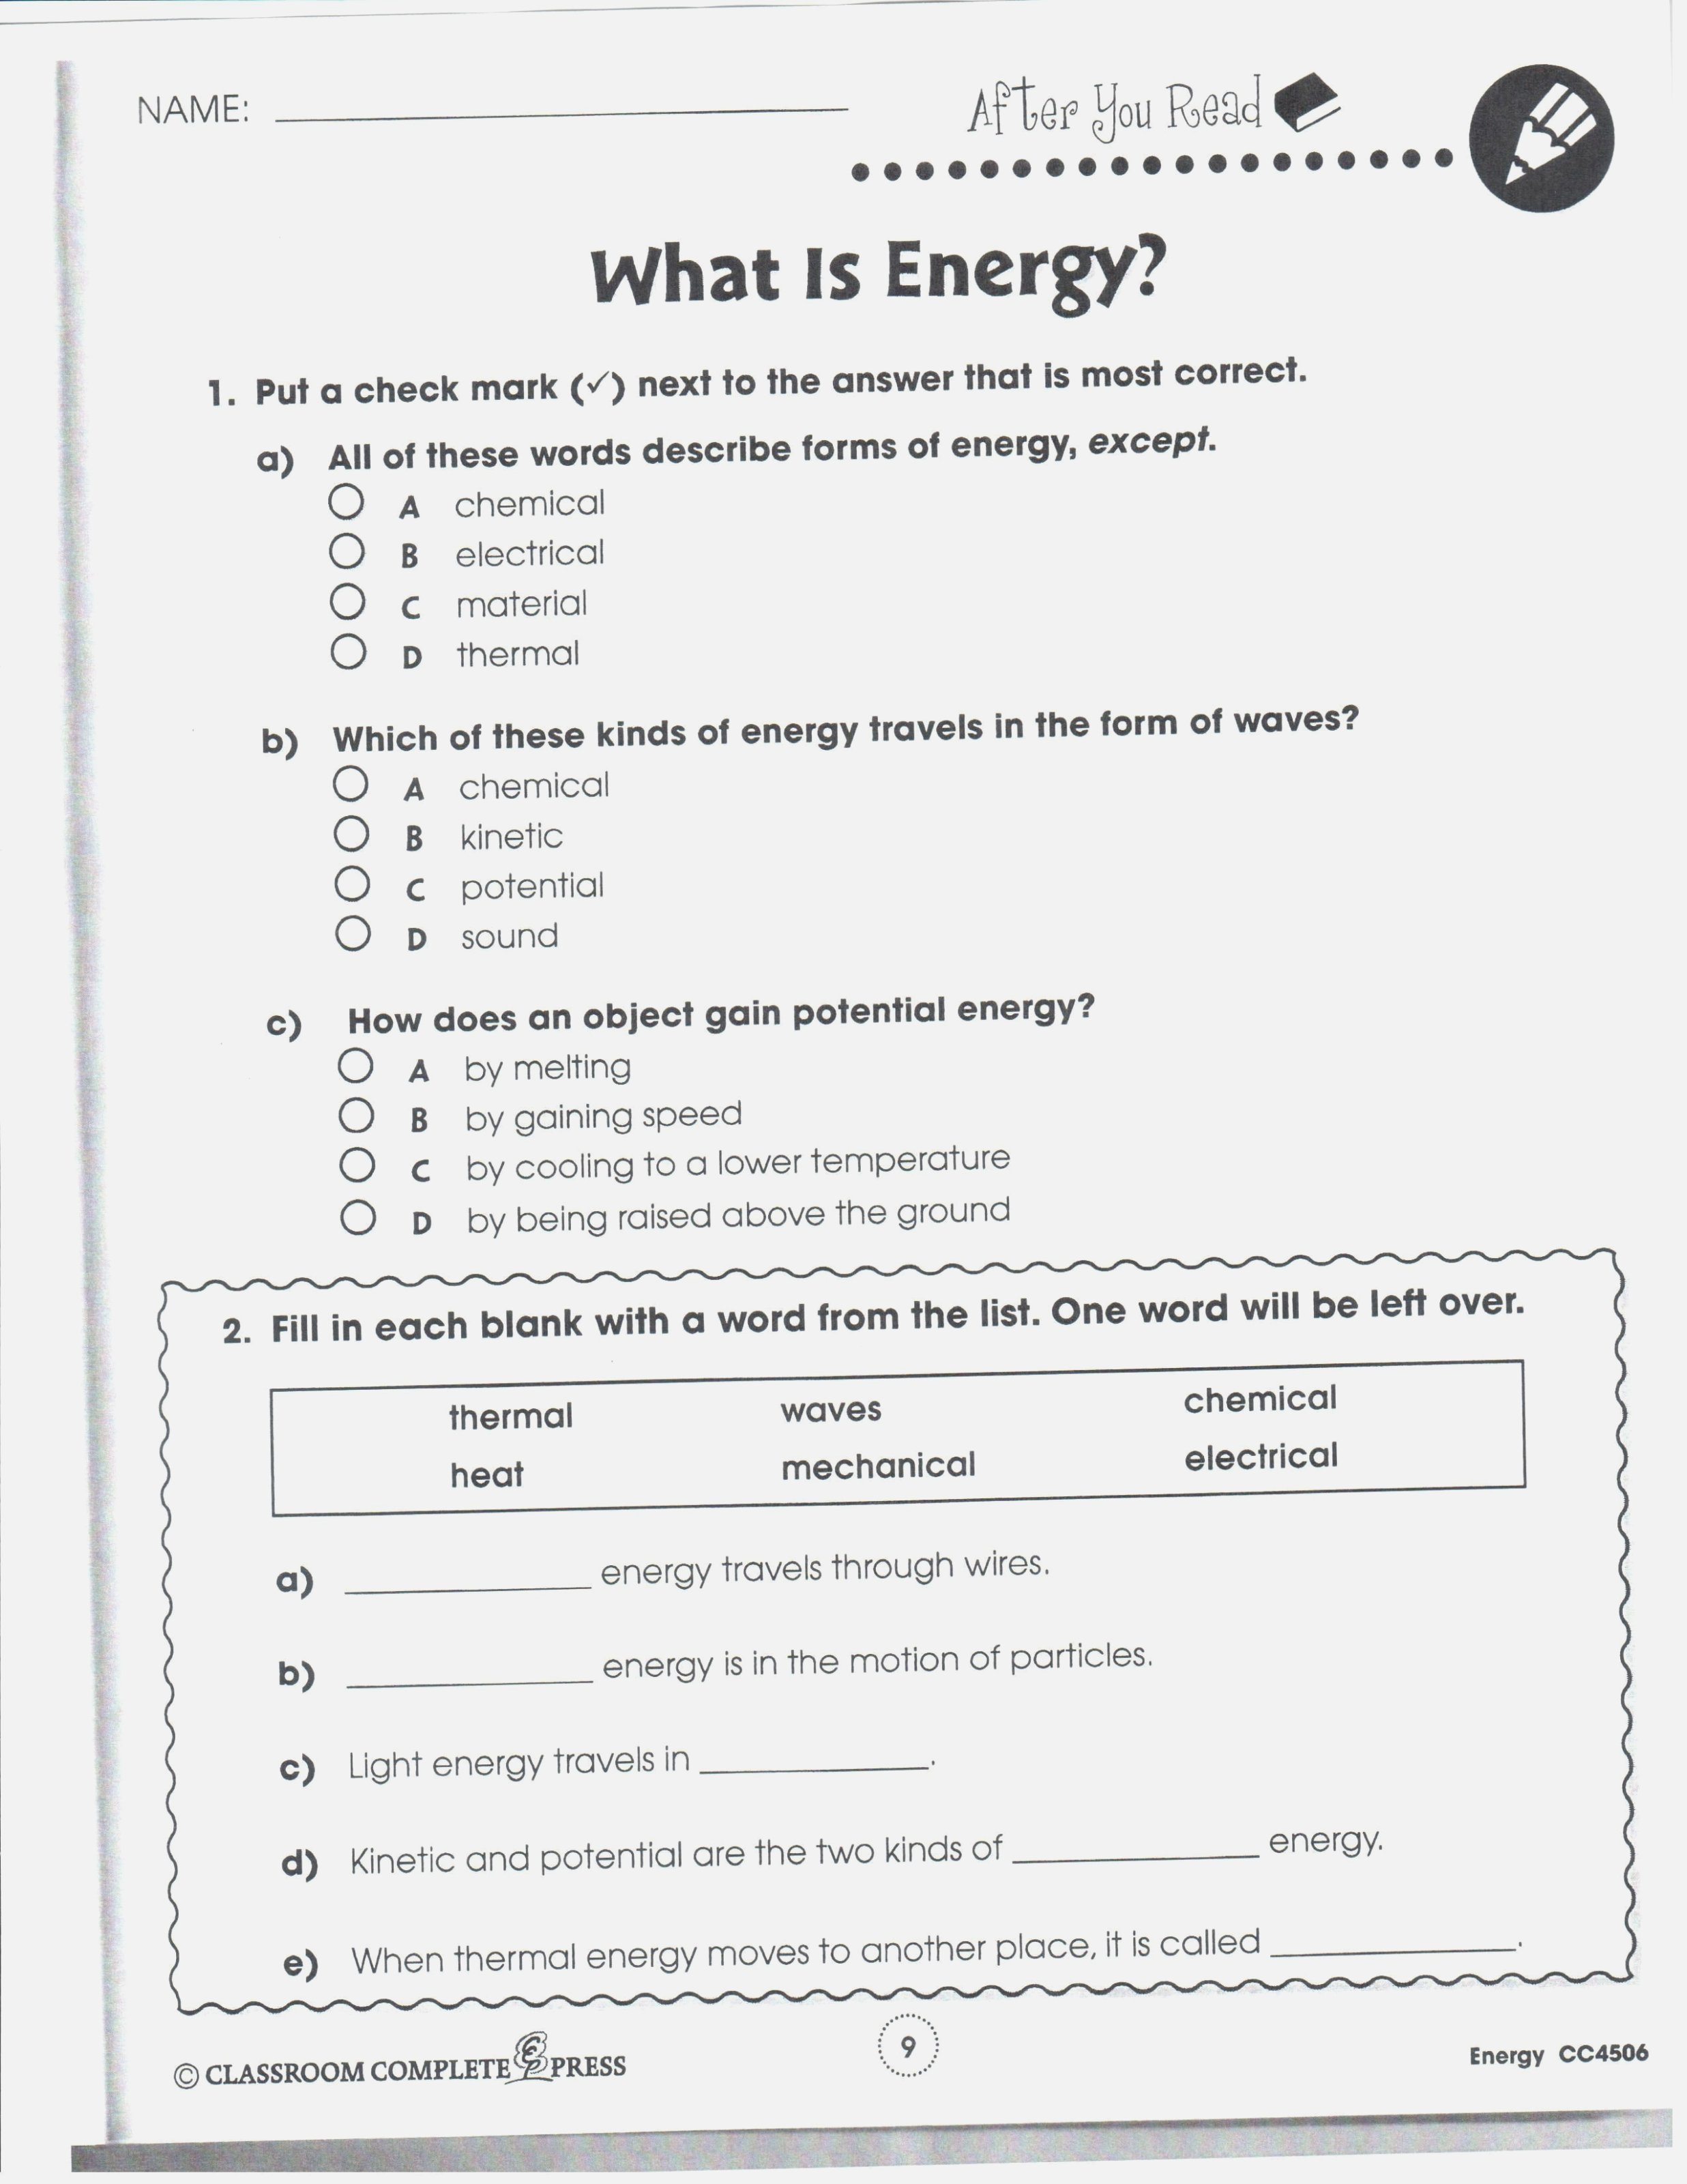 P Sale Of Home Worksheet With Greatest Common Factor Worksheet Or Sale Of Home Worksheet